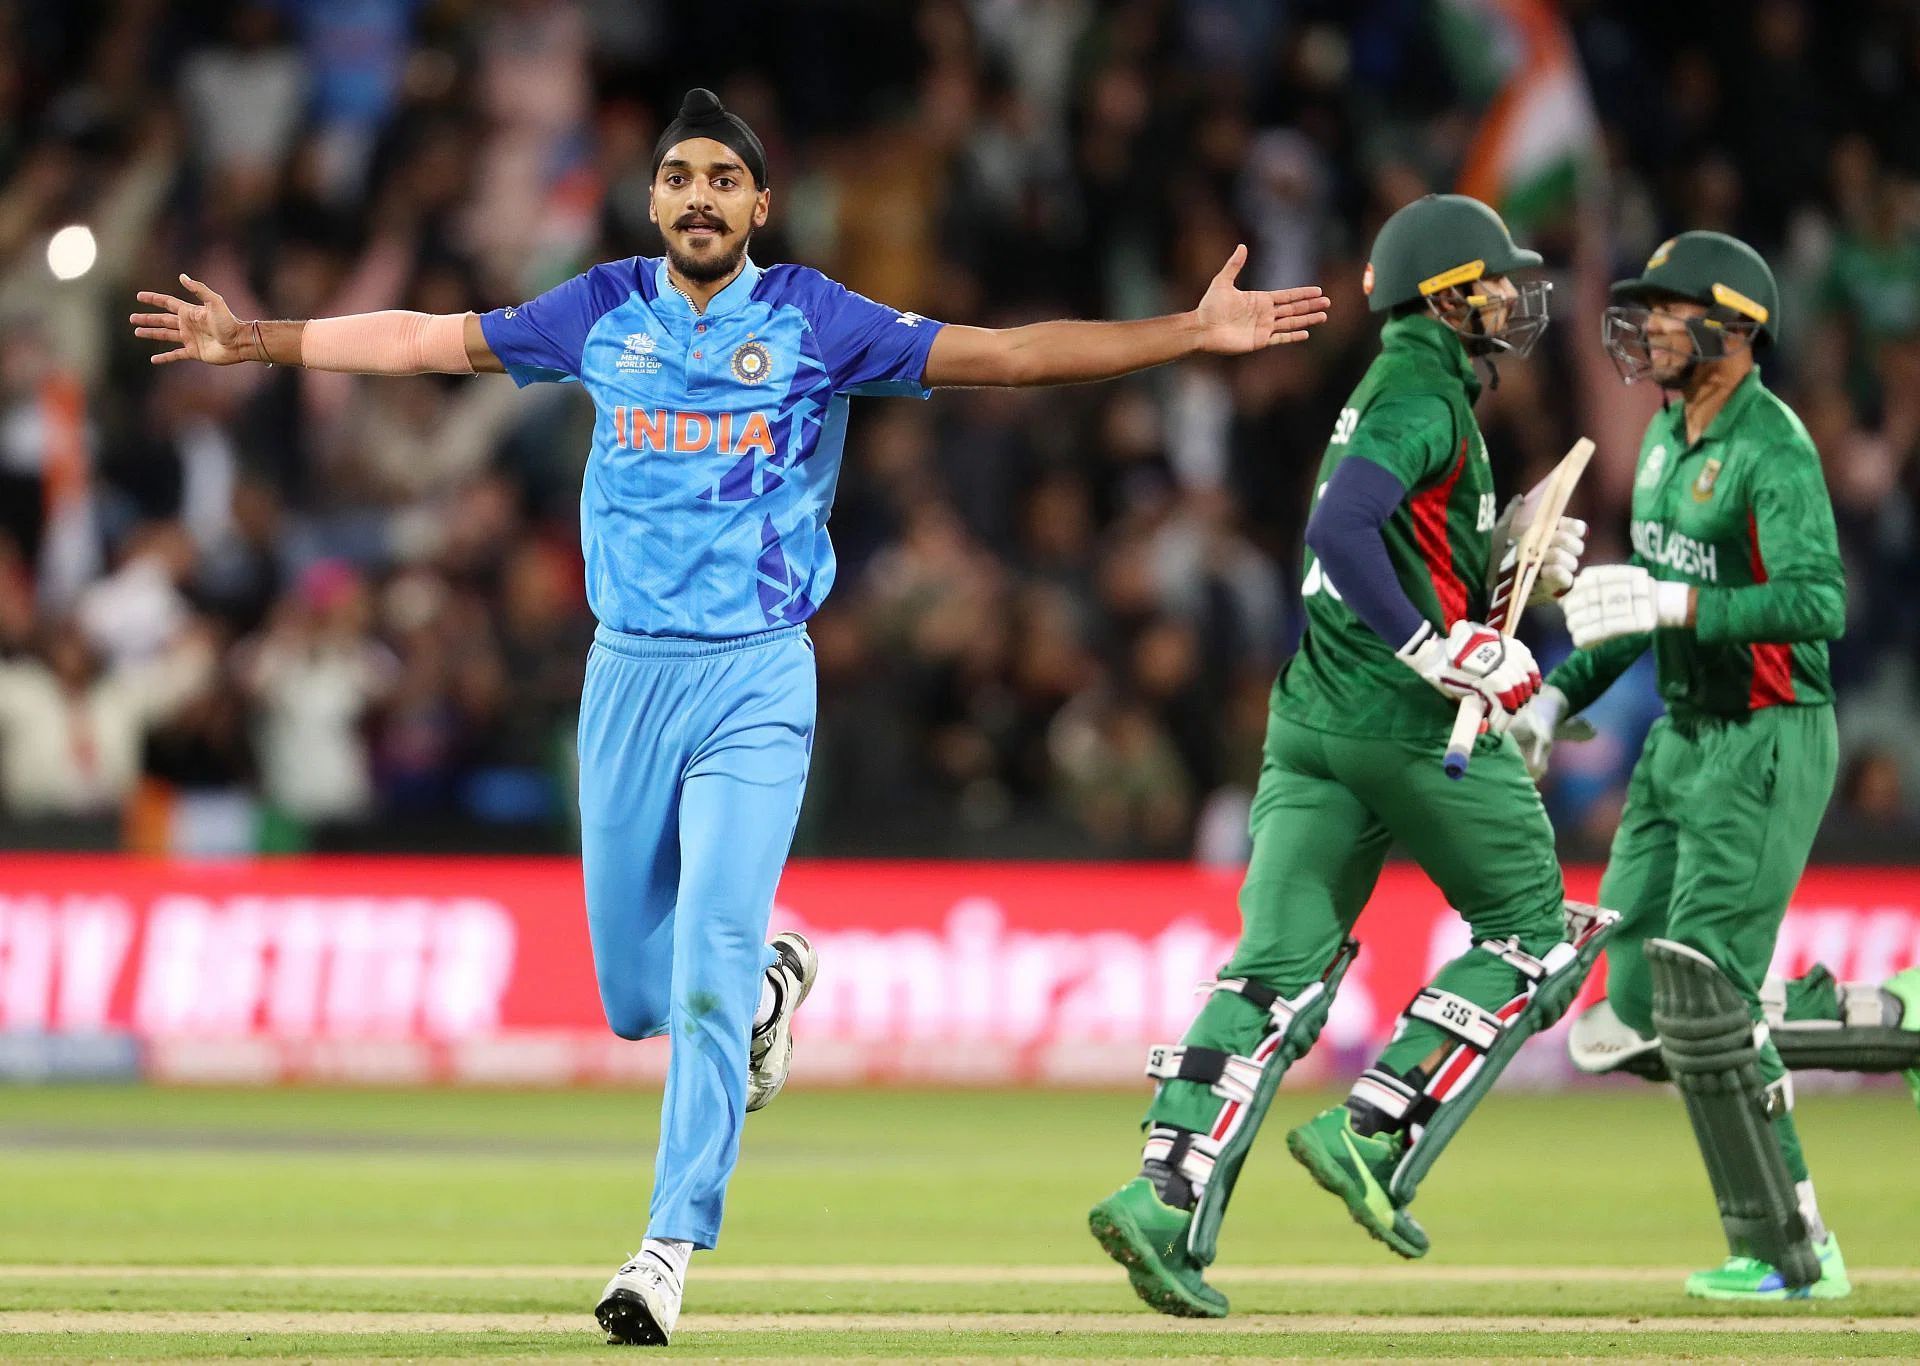 Bangladesh needed 20 runs to win in the last over of the game against India. Nurul Hasan struck Arshdeep Singh for a six and a four. But the young left-arm seamer held his nerve as Team India sneaked home by five runs (D/L method). Pic: Getty Images